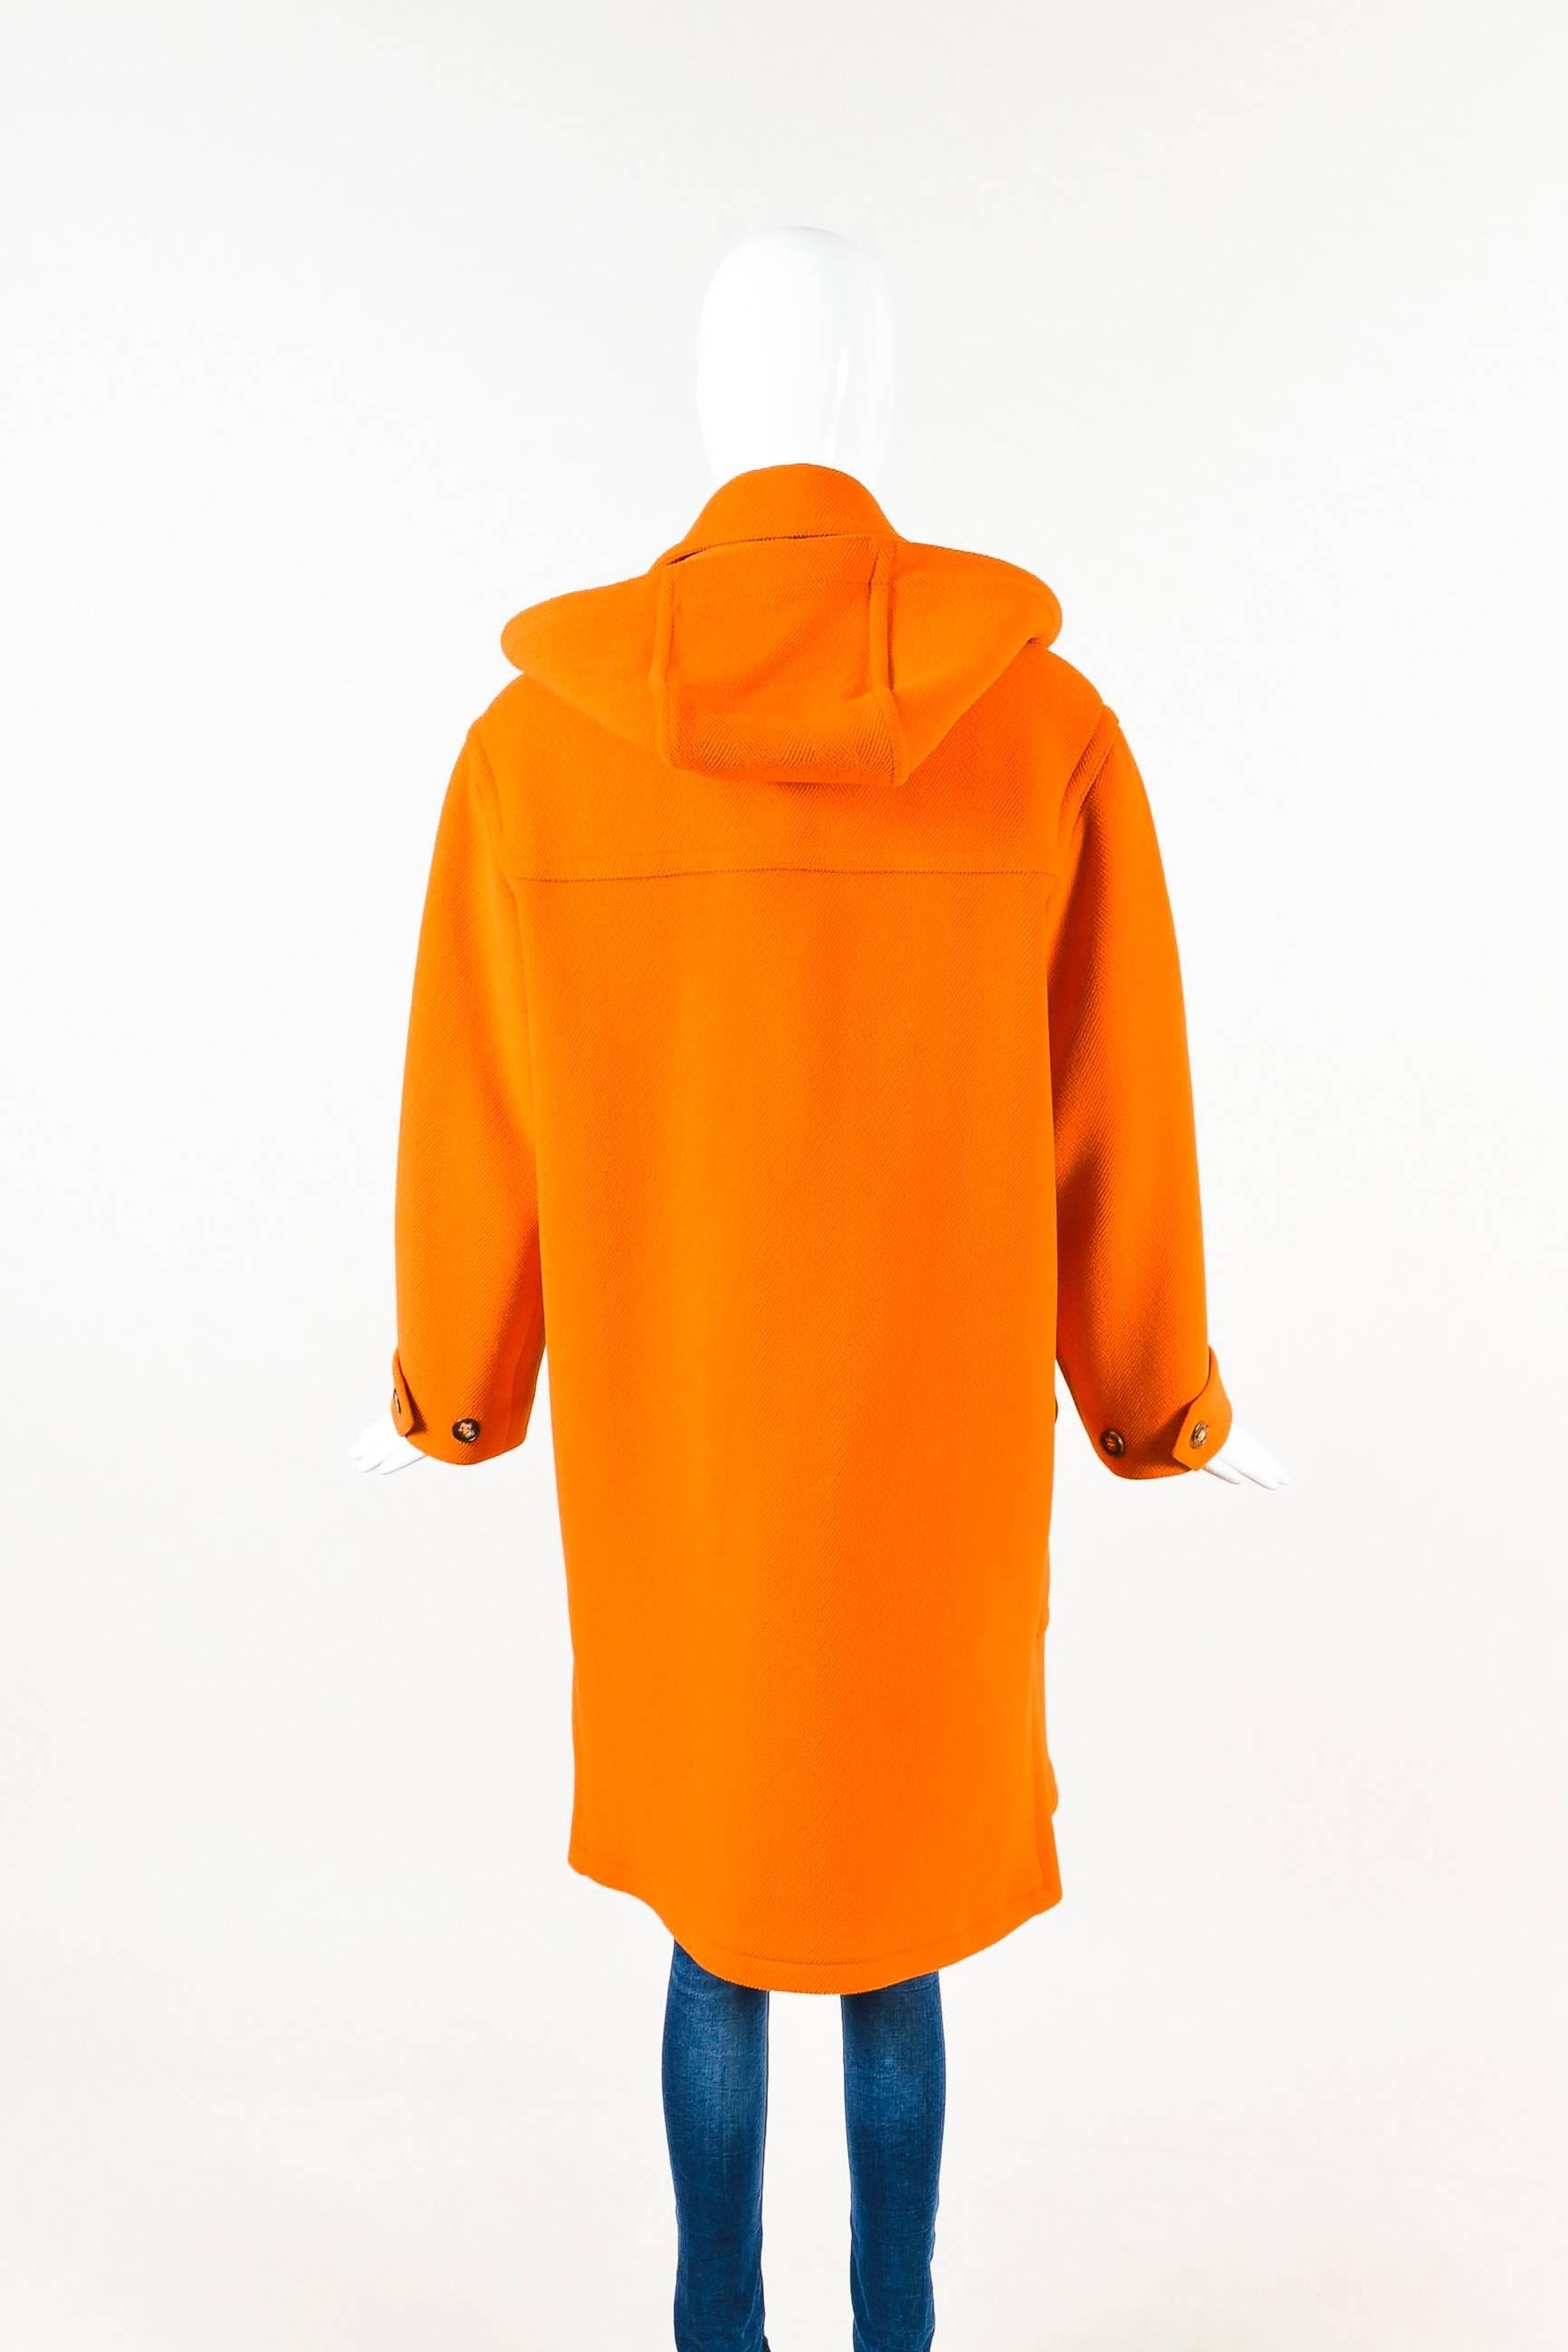 Orange textured wool hooded coat from Hermes. Toggle closures down the front with a brown leather trim. Two front flap pockets. Collar. Hood can be removed, if desired. Short straps on the ends of sleeves with button closures. Slits on the ends of